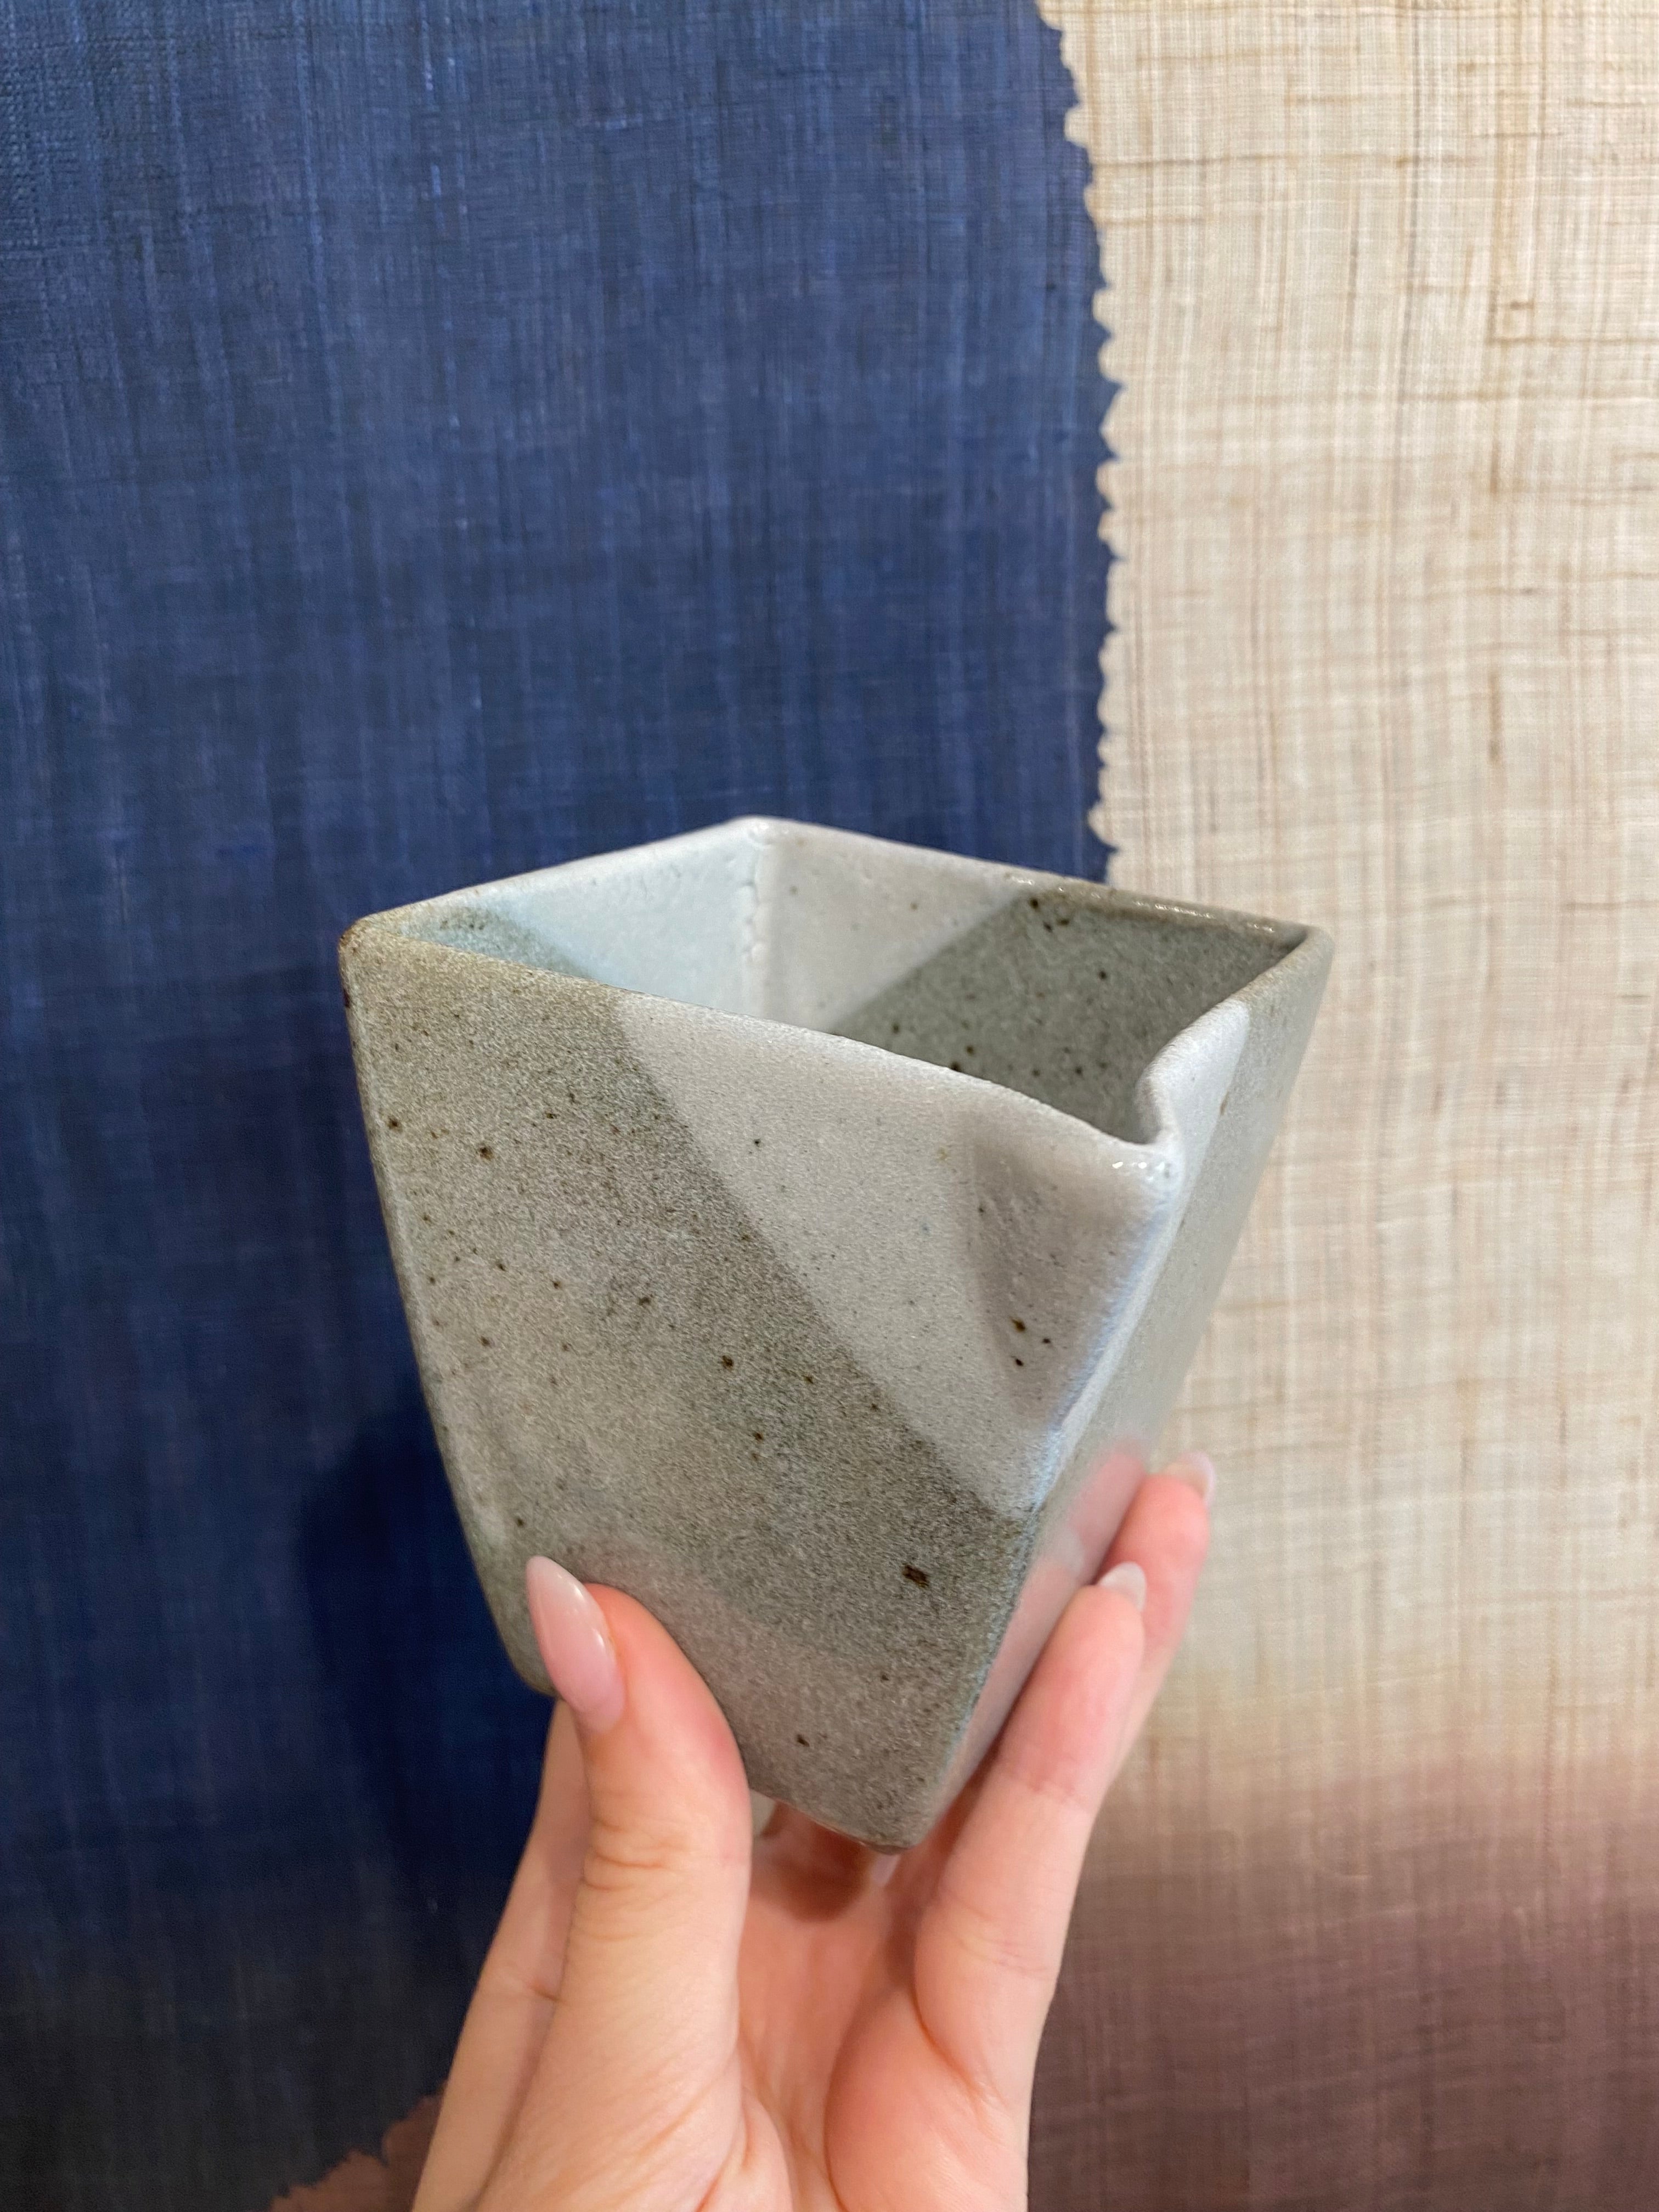 Square sake pitcher with gray glaze and crackers